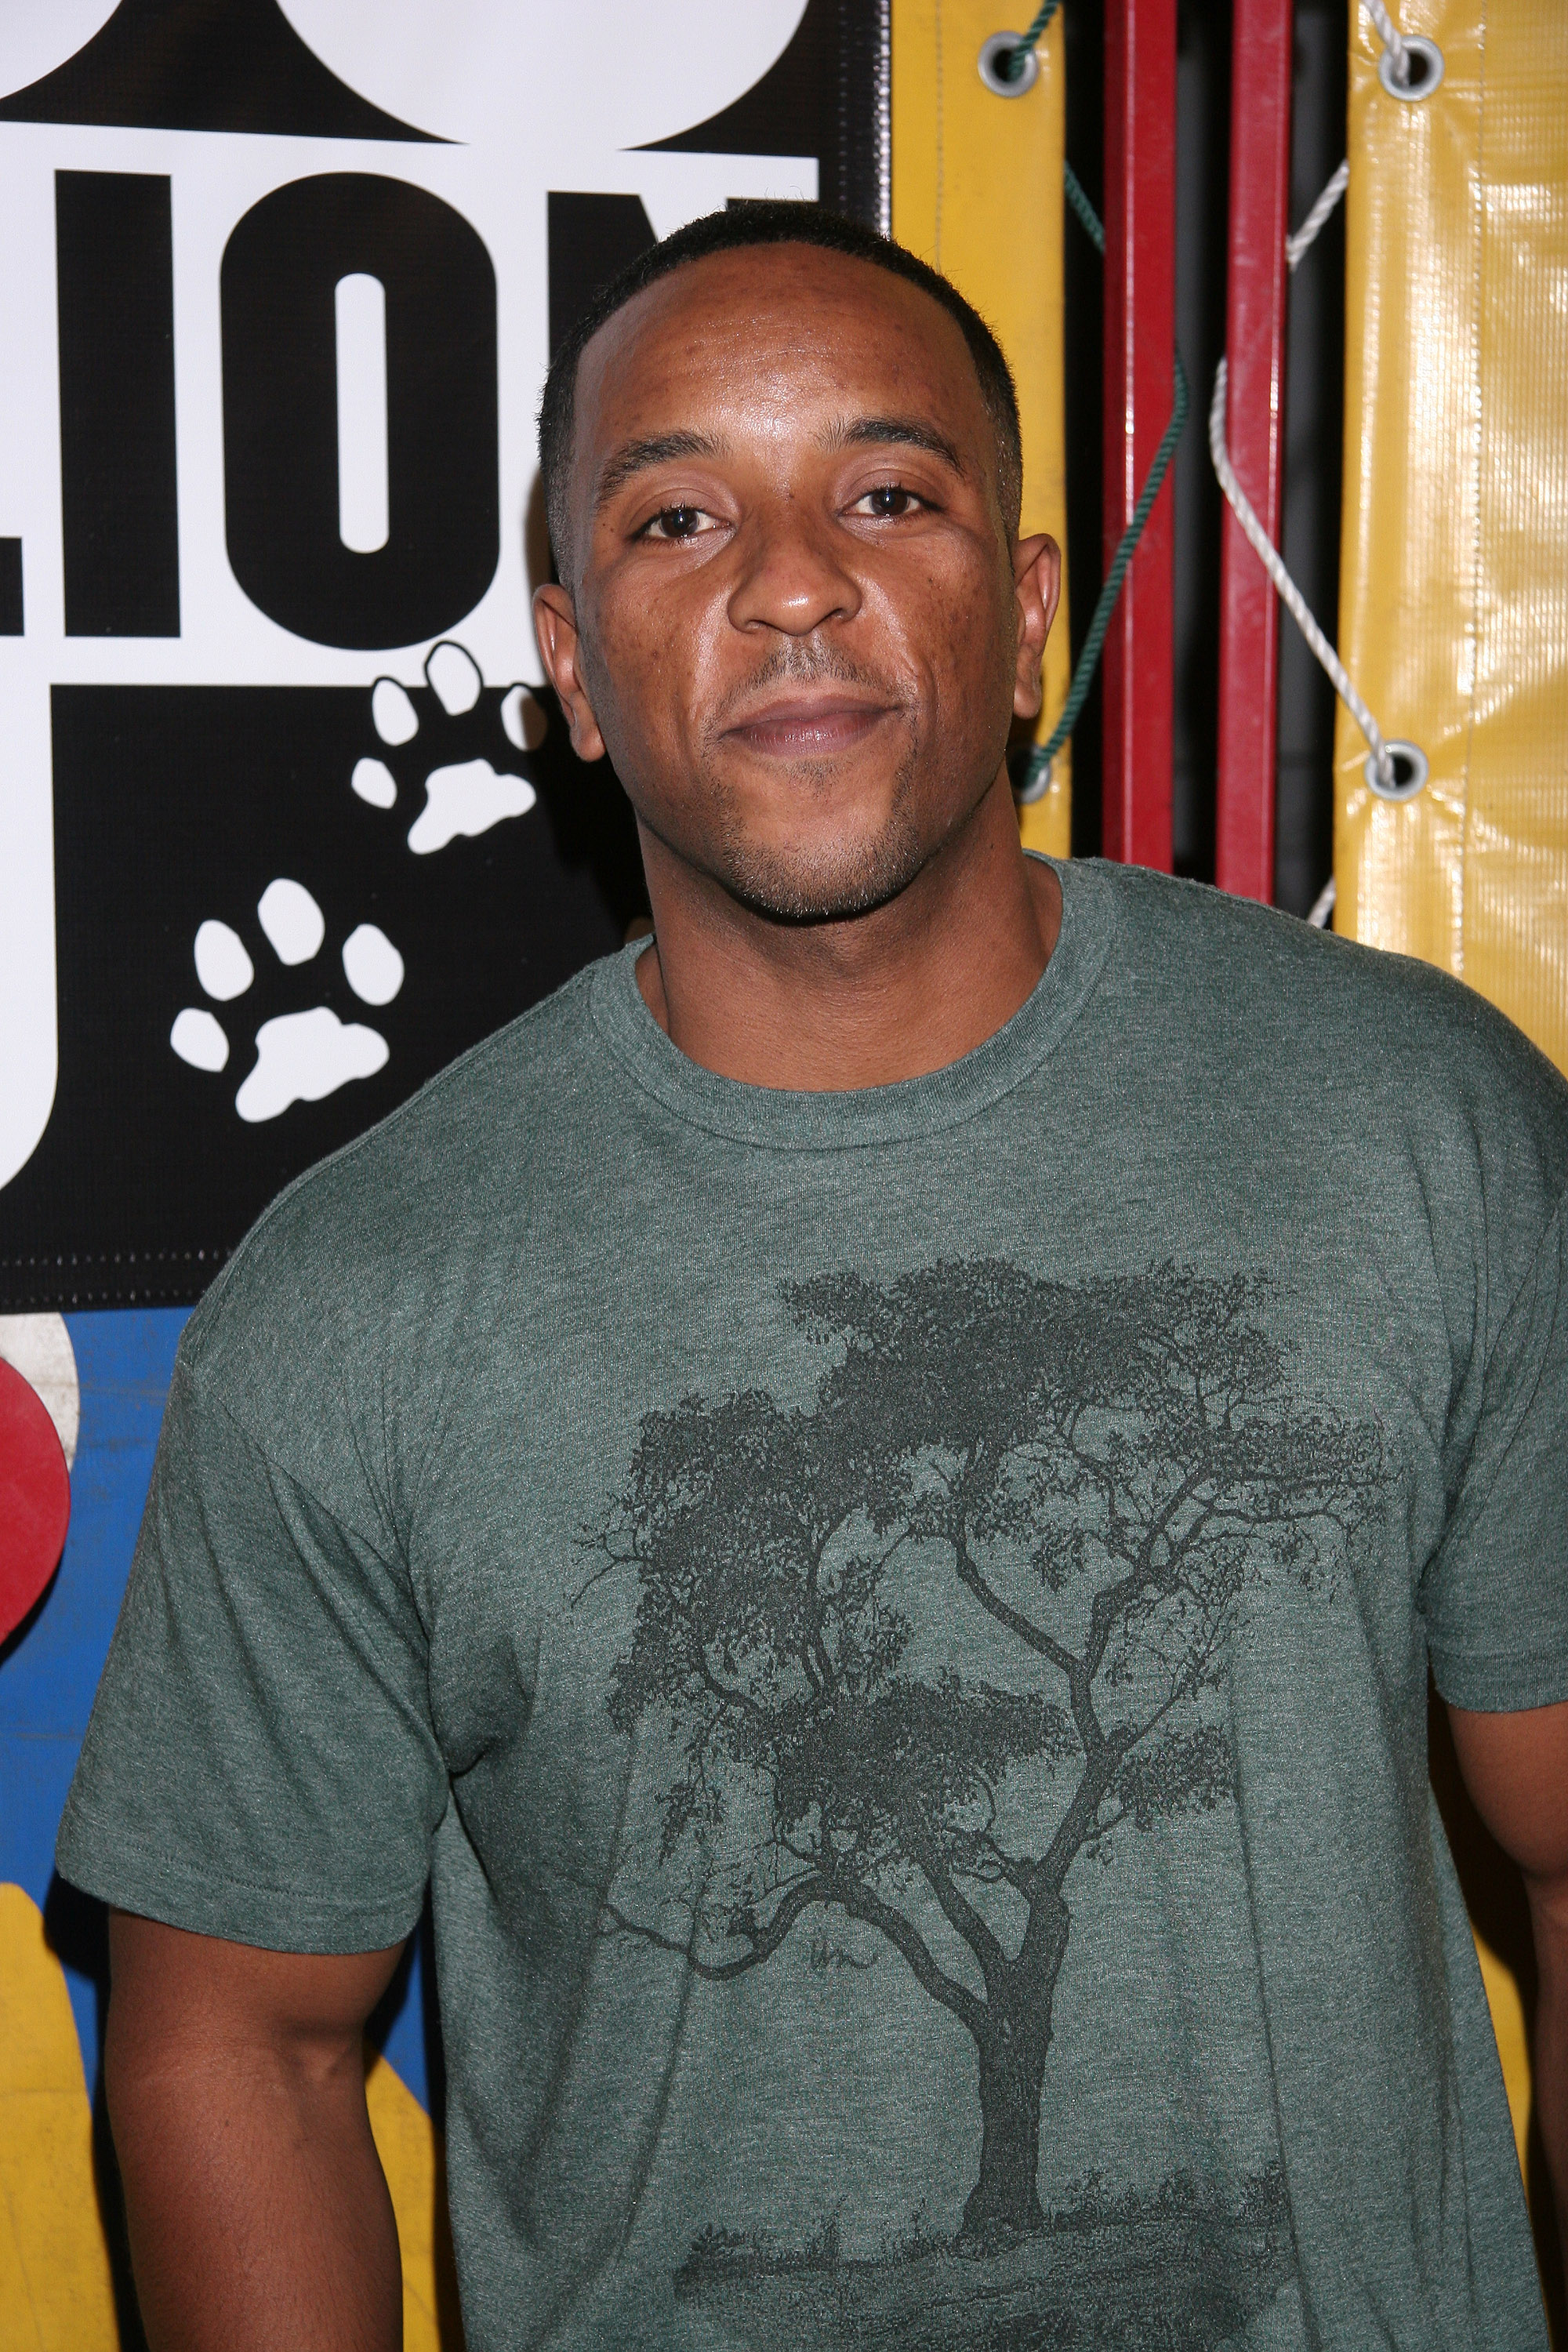 Brandon Quintin Adams attends the 600million.org charity event held at Ecco Ultra Lounge on October 12, 2011, in Los Angeles, California | Source: Getty Images